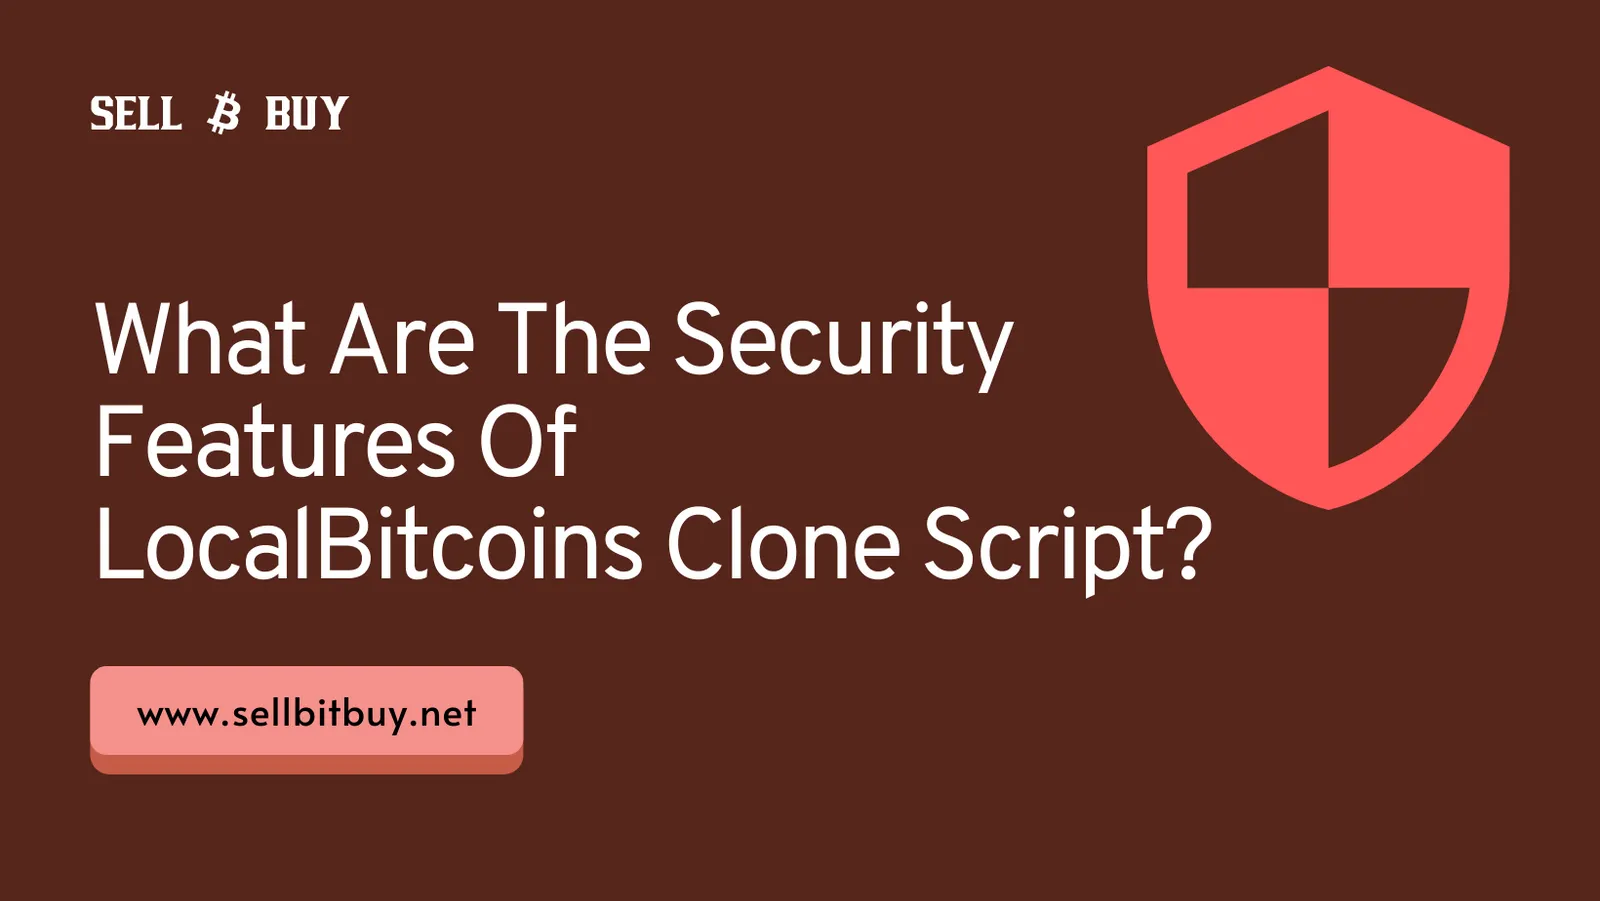 What Are The Security Features Of LocalBitcoins Clone Script?